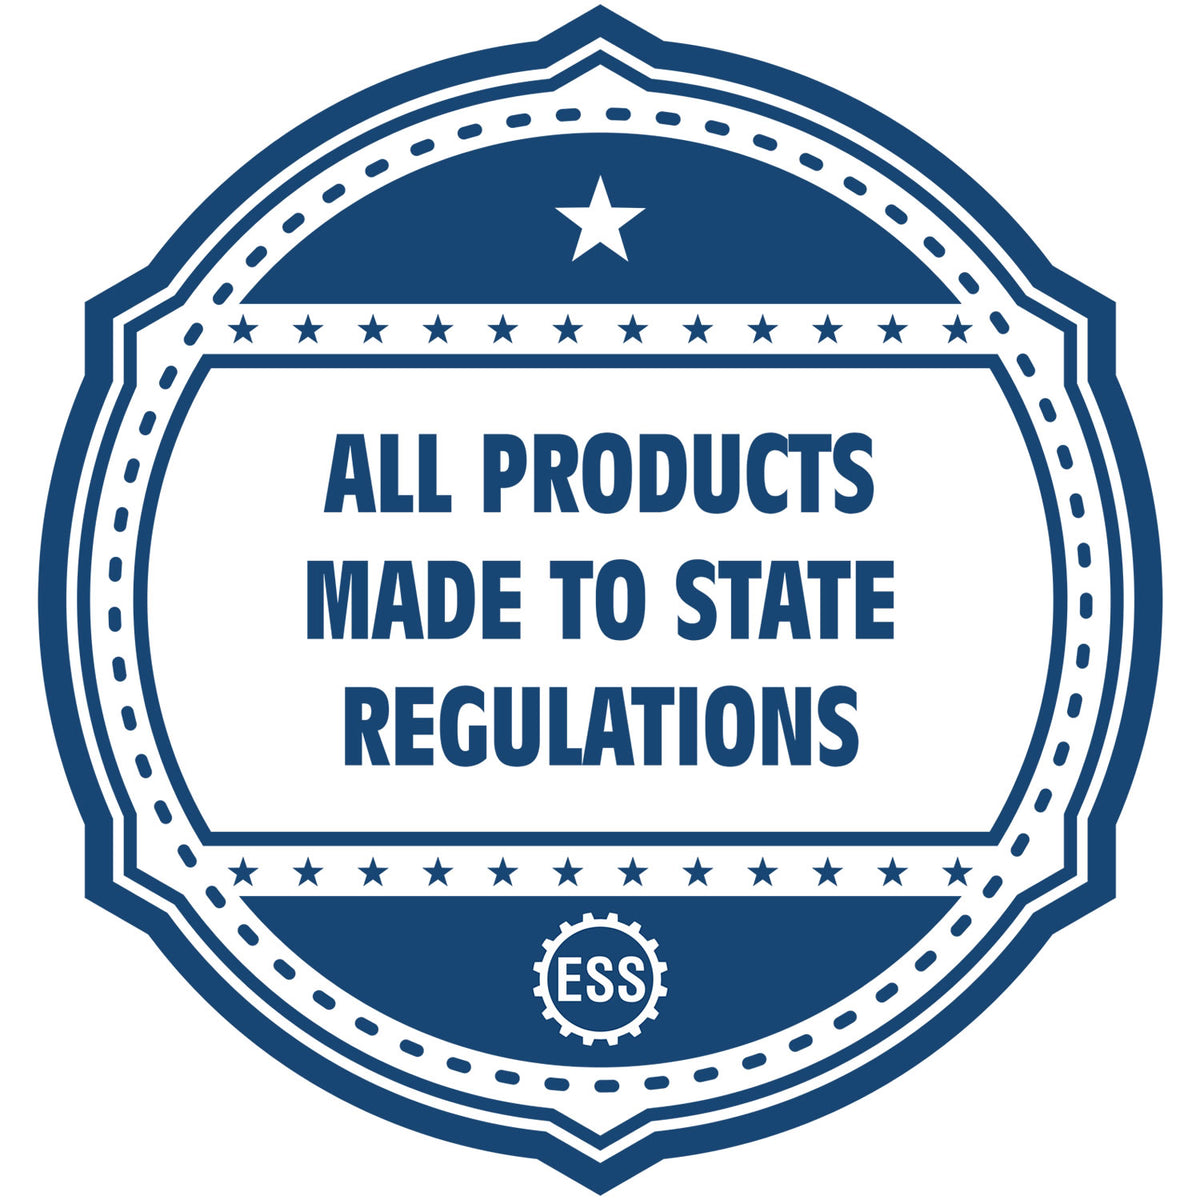 An icon or badge element for the Extended Long Reach Virginia Architect Seal Embosser showing that this product is made in compliance with state regulations.